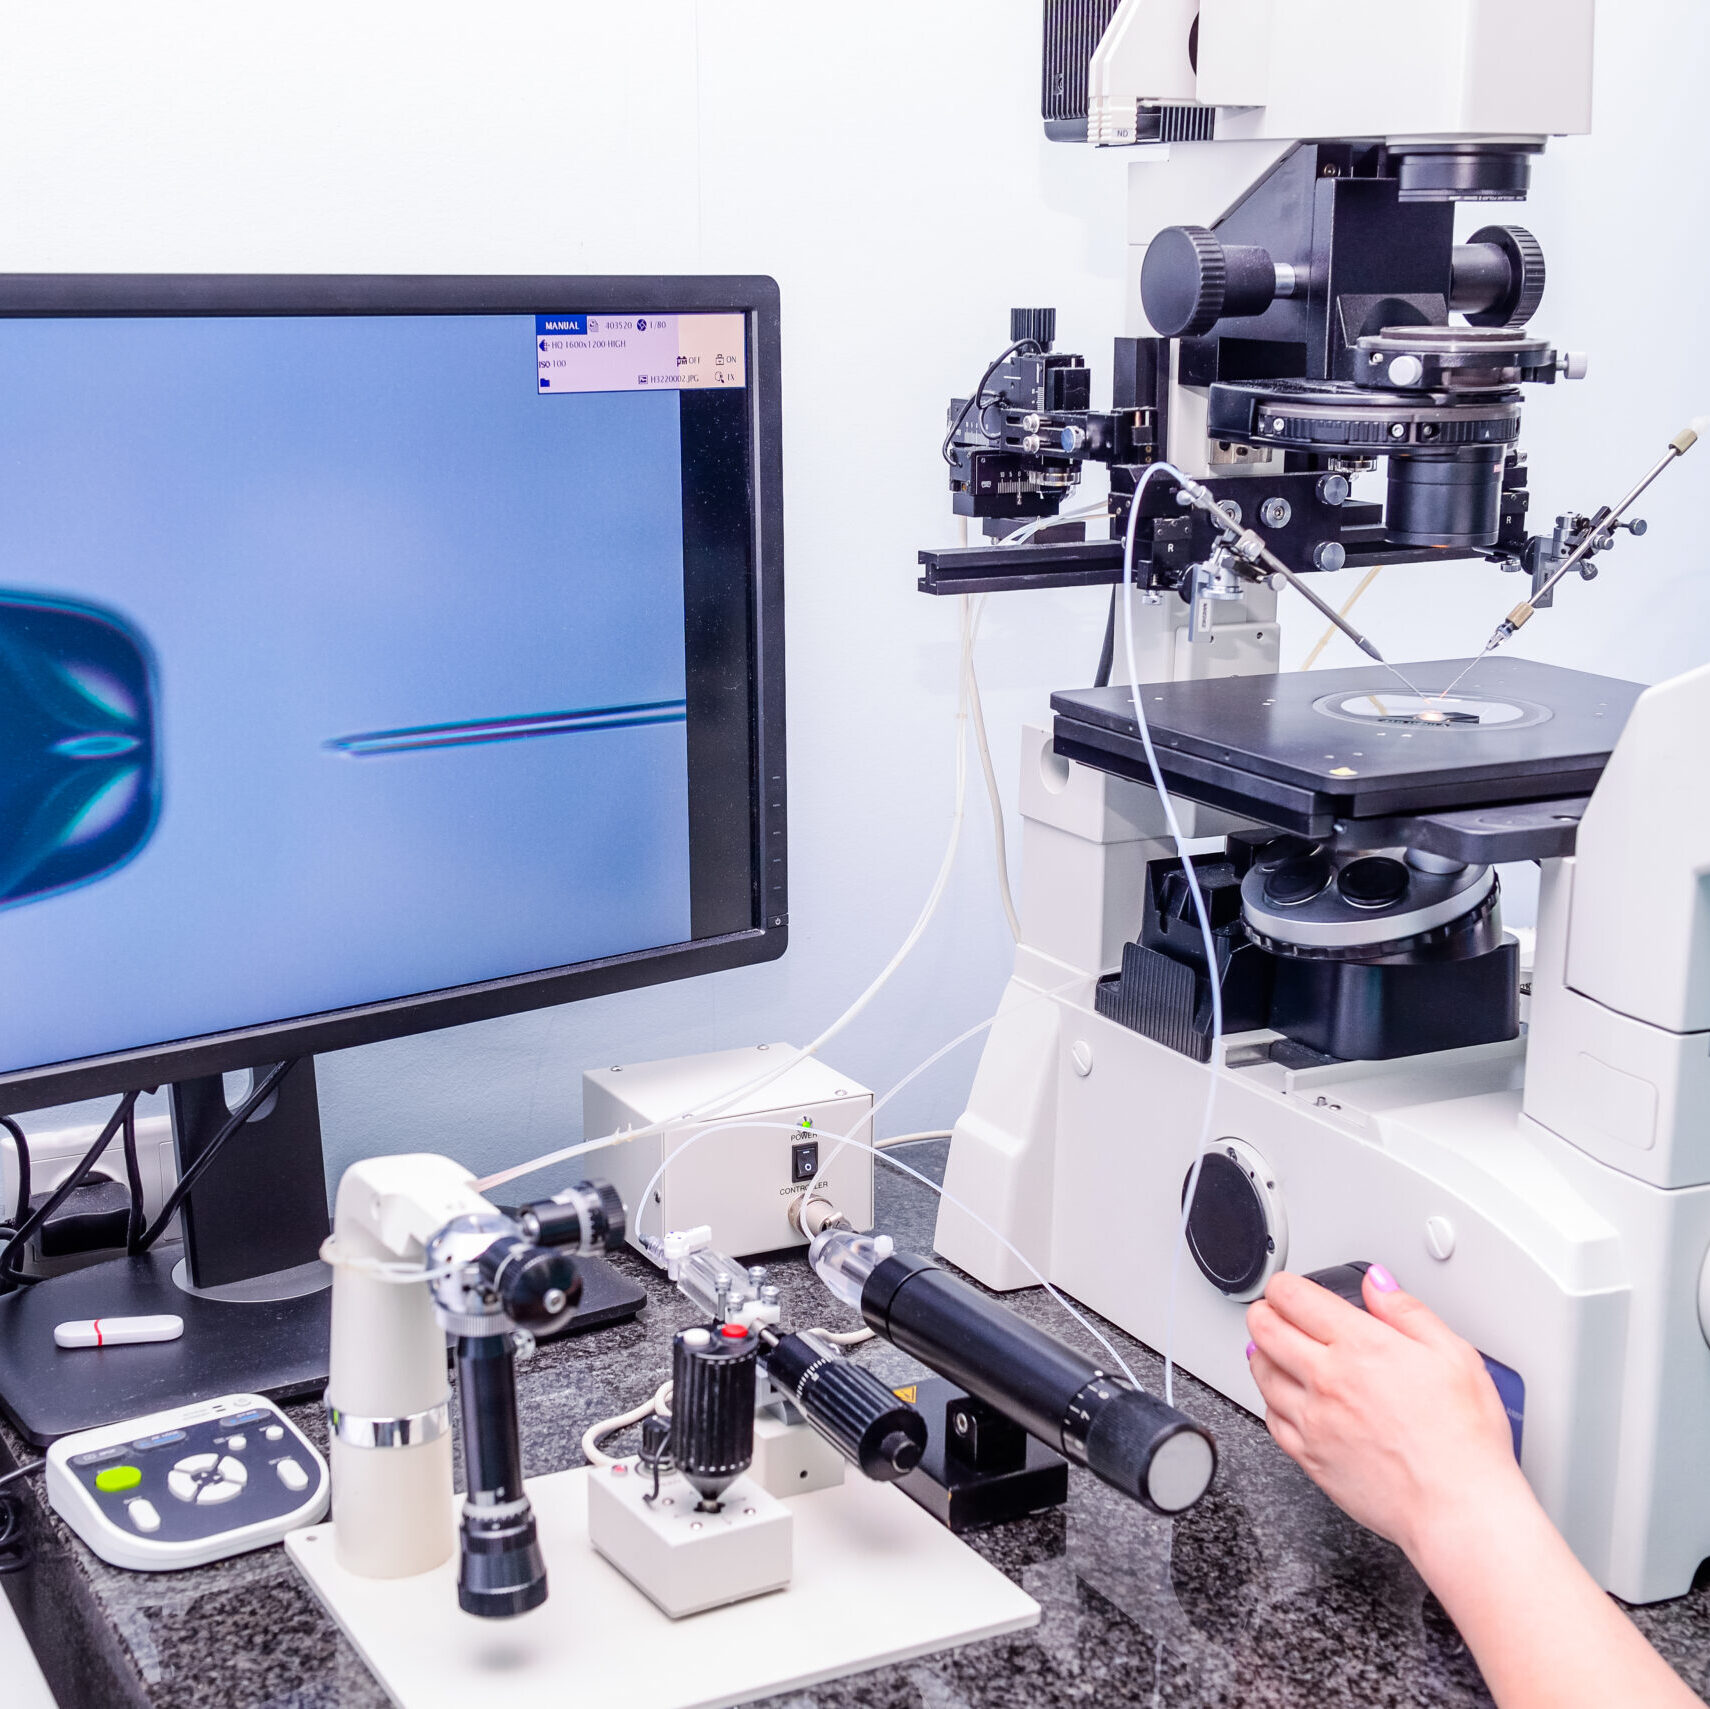 Dr. Glatstein Publishes Research on AI in the IVF Lab